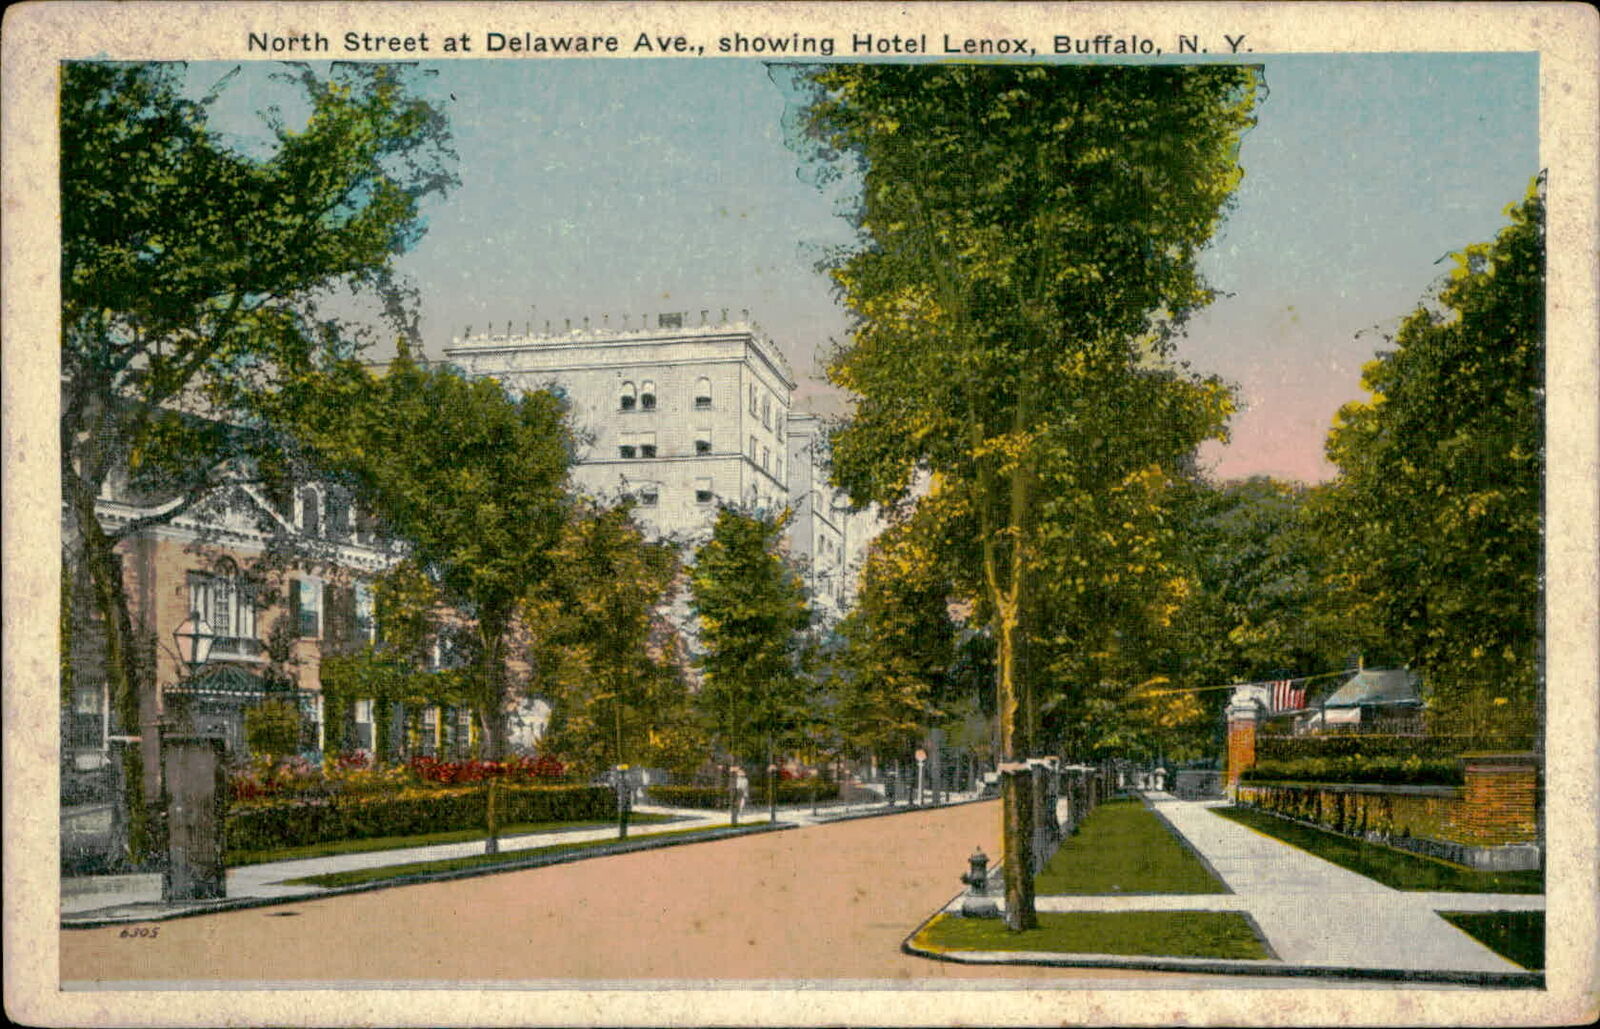 Postcard: 6305 North Street at Delaware Ave., showing Hotel Lenox, Buf